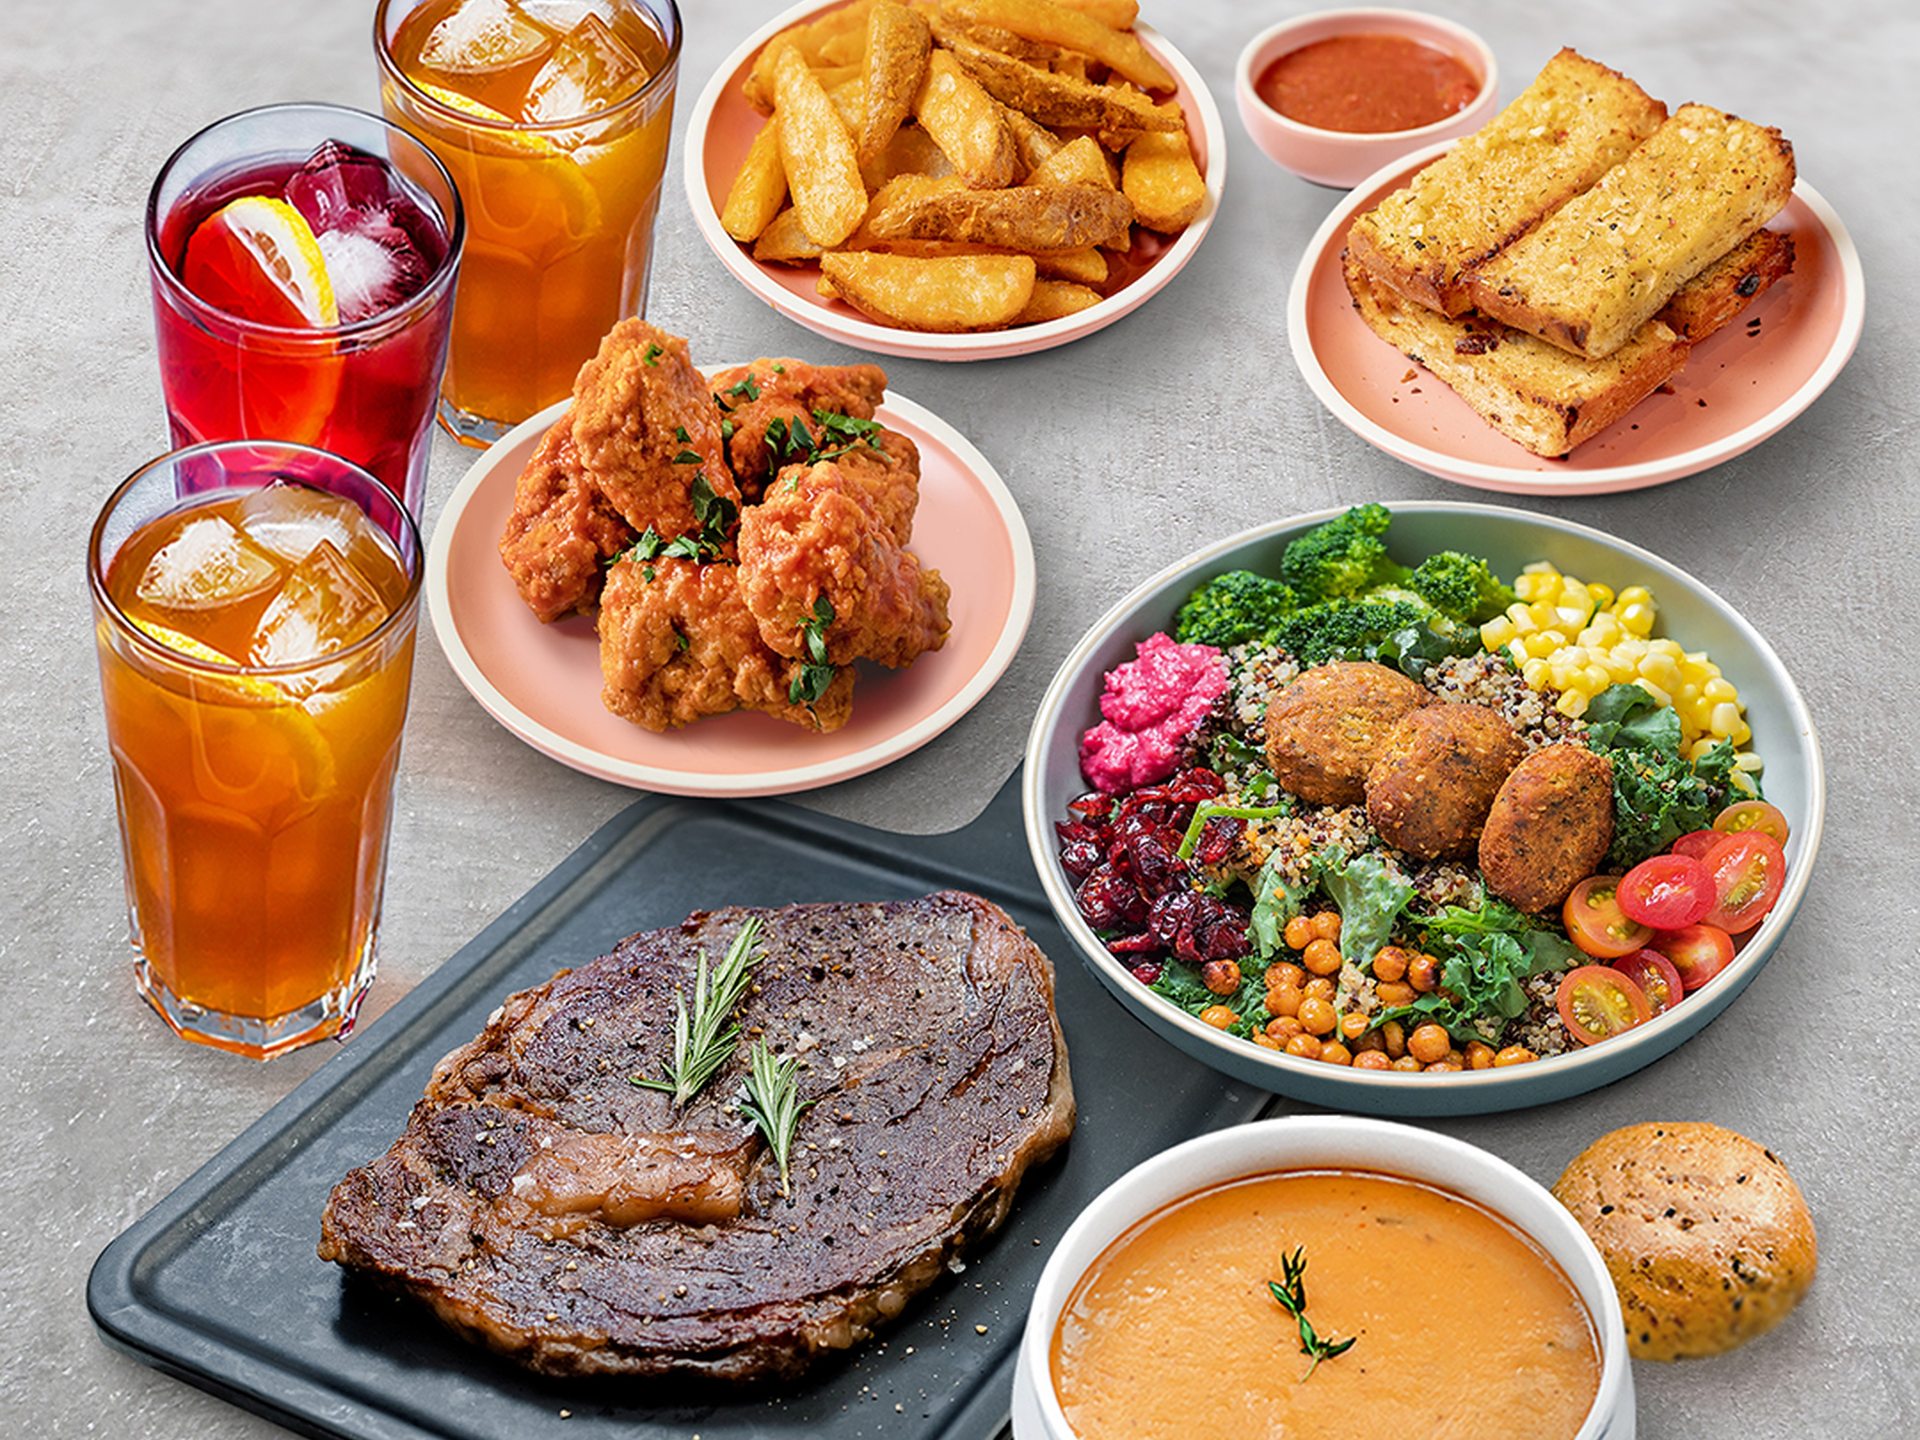 Make grandma proud: Score food deals up to 50% off at this Grandmother of All Sales